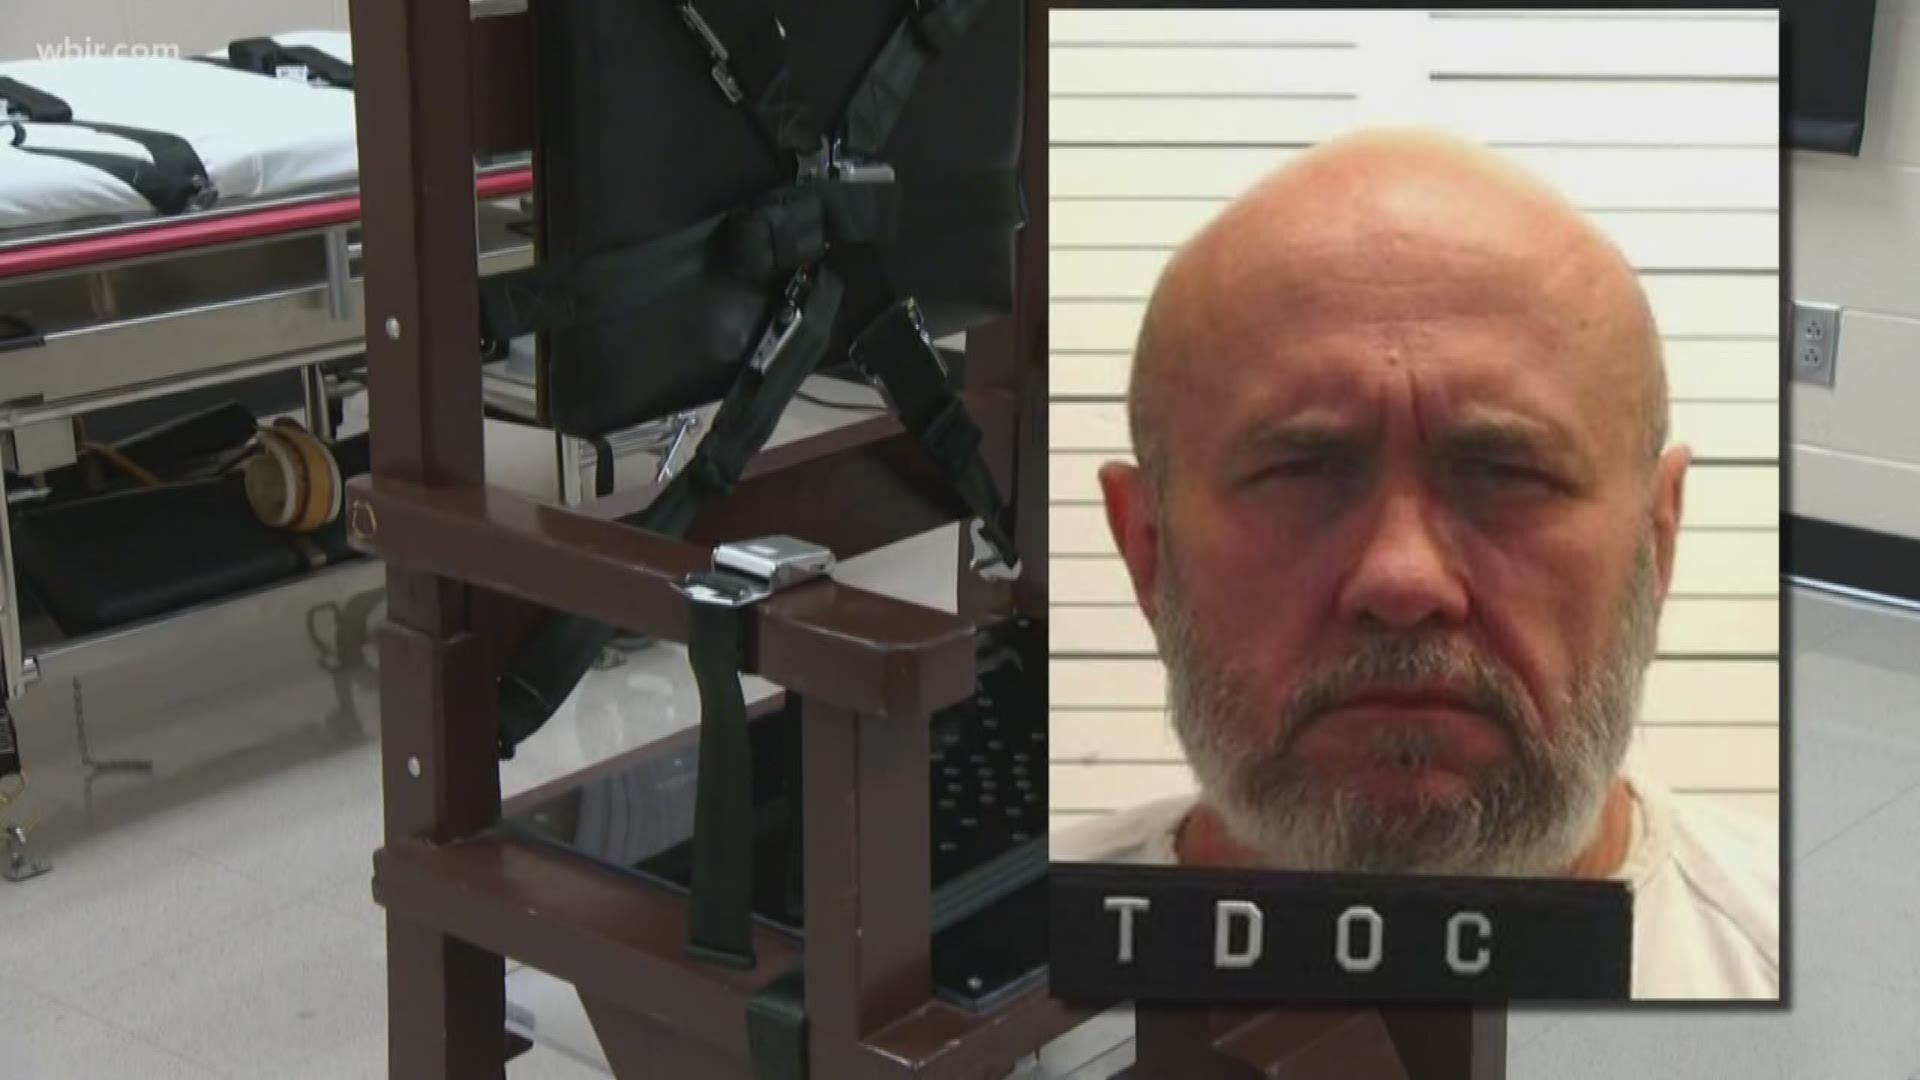 The 63-year-old chose electrocution rather than death by lethal injection, however, it's a choice that does not exist in our neighboring state of Georgia, due in part to a Knoxville attorney.